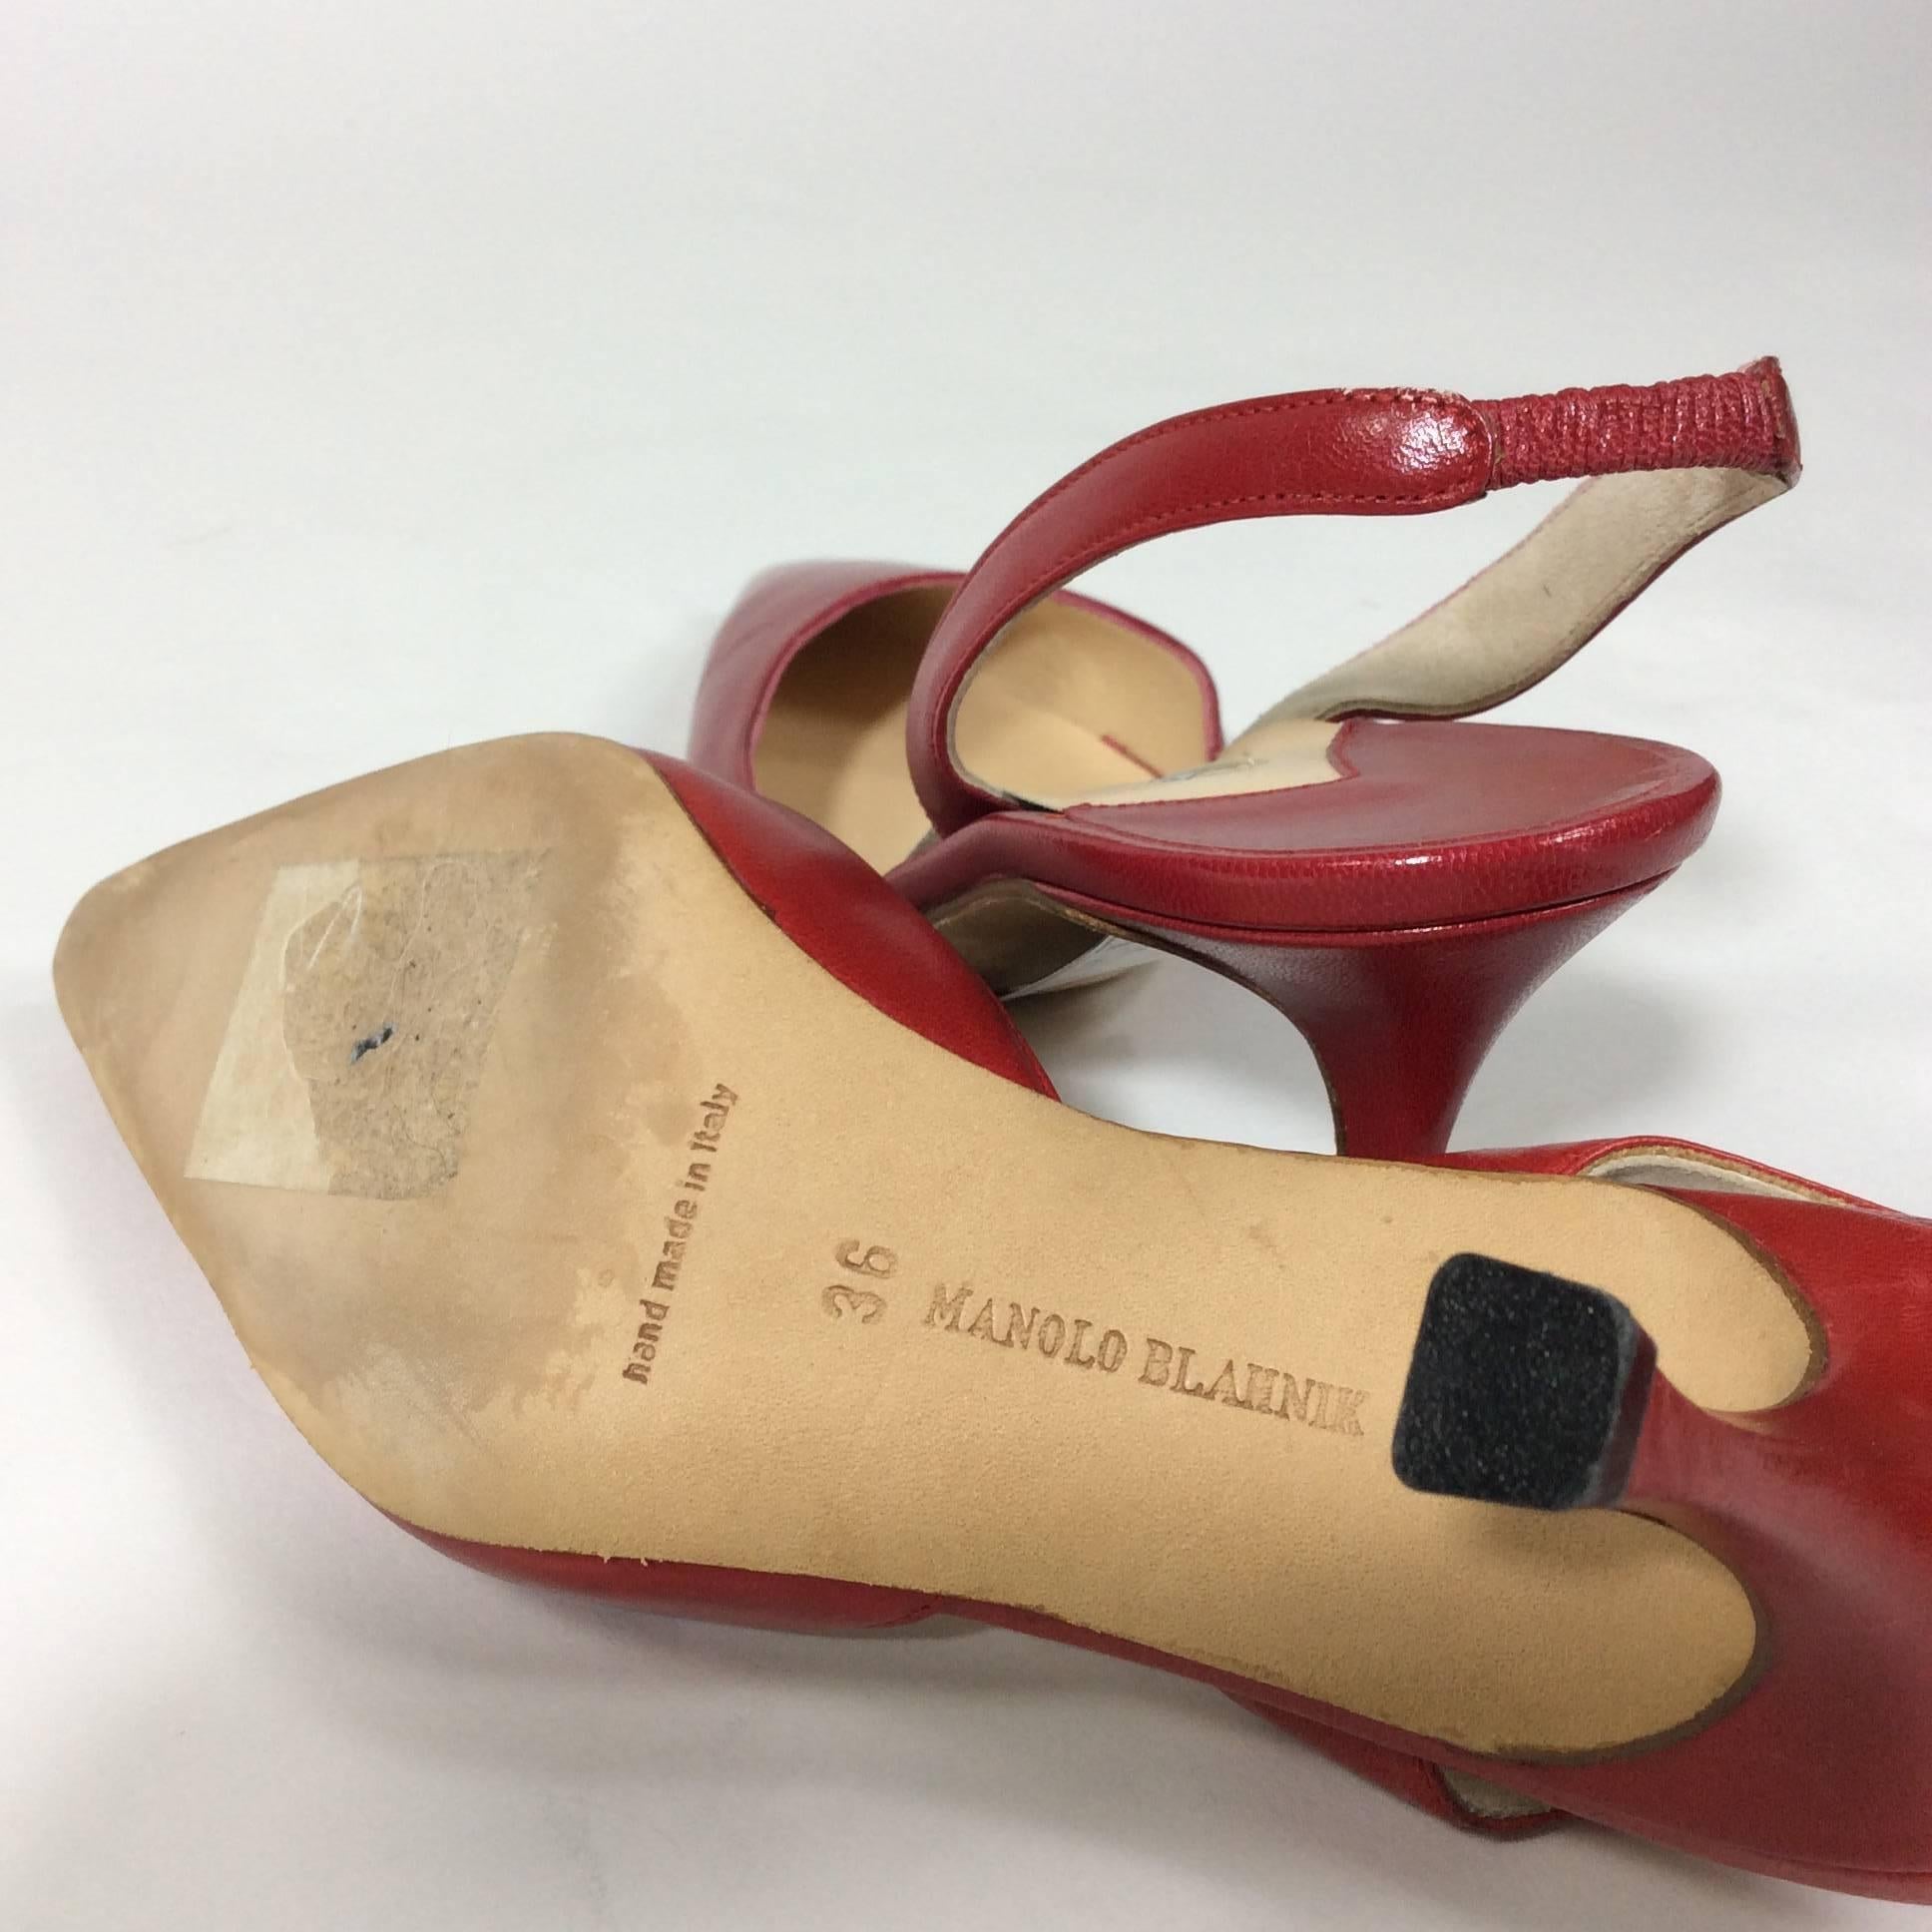 Manolo Blahnik Red Pointed Heels with Heel Strap with a 2 inch heel. Size is a 36 which equates to a 6 as the size runs small. Shoe is in great condition with minimal wear on the sole.